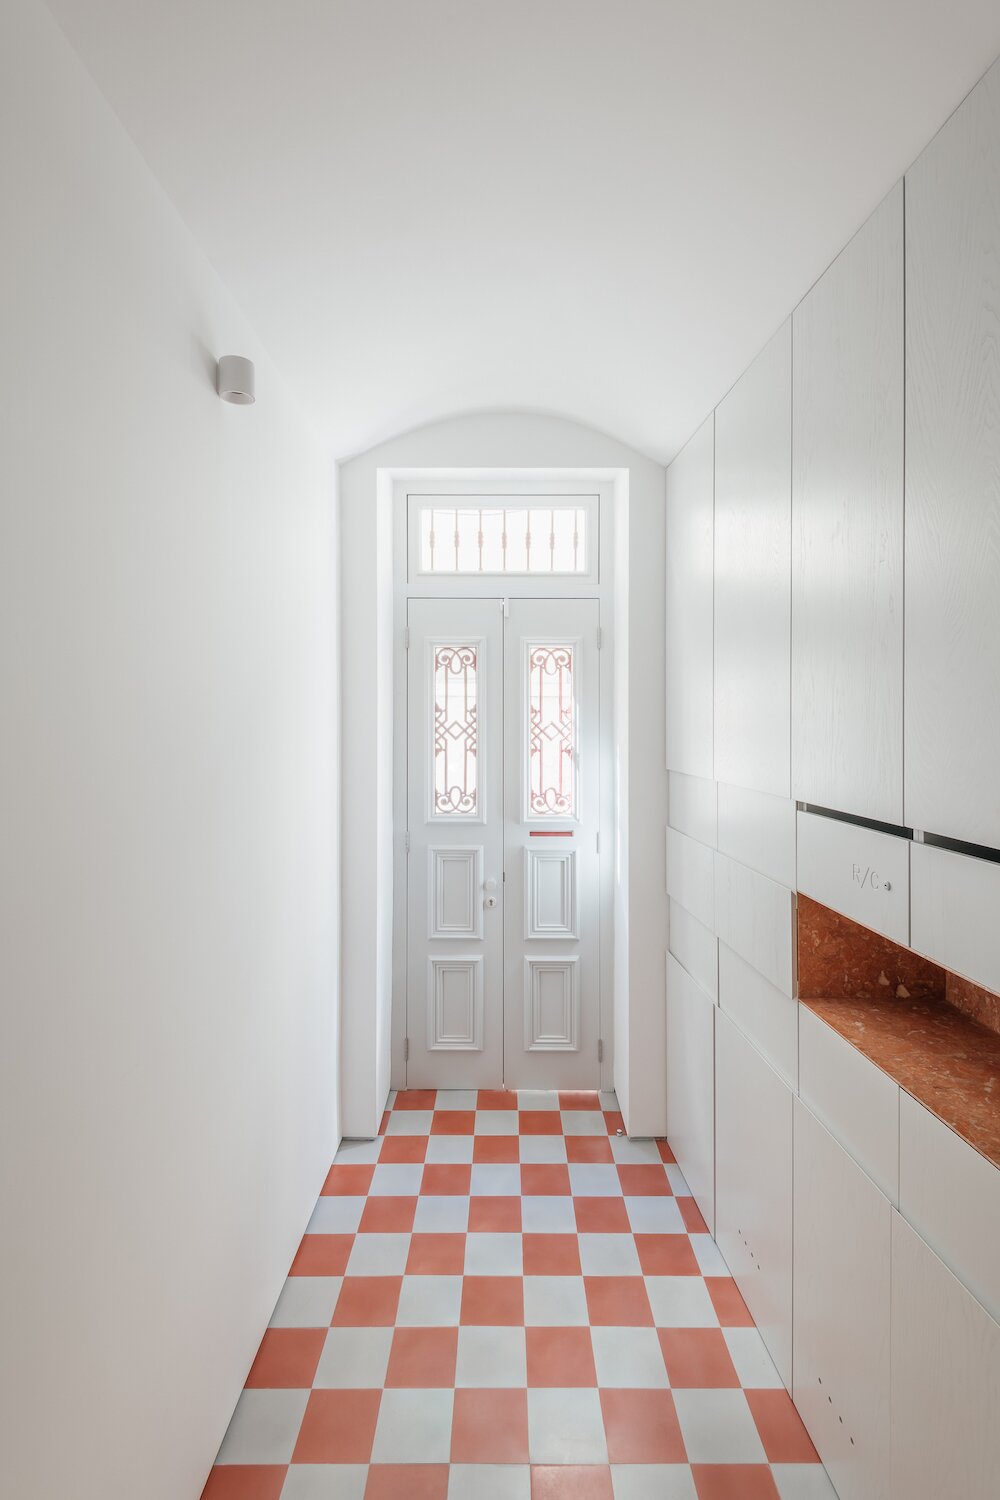 A Lisbon Apartment Building Is Brought Back to Life With Tidy, Light-Filled Interiors